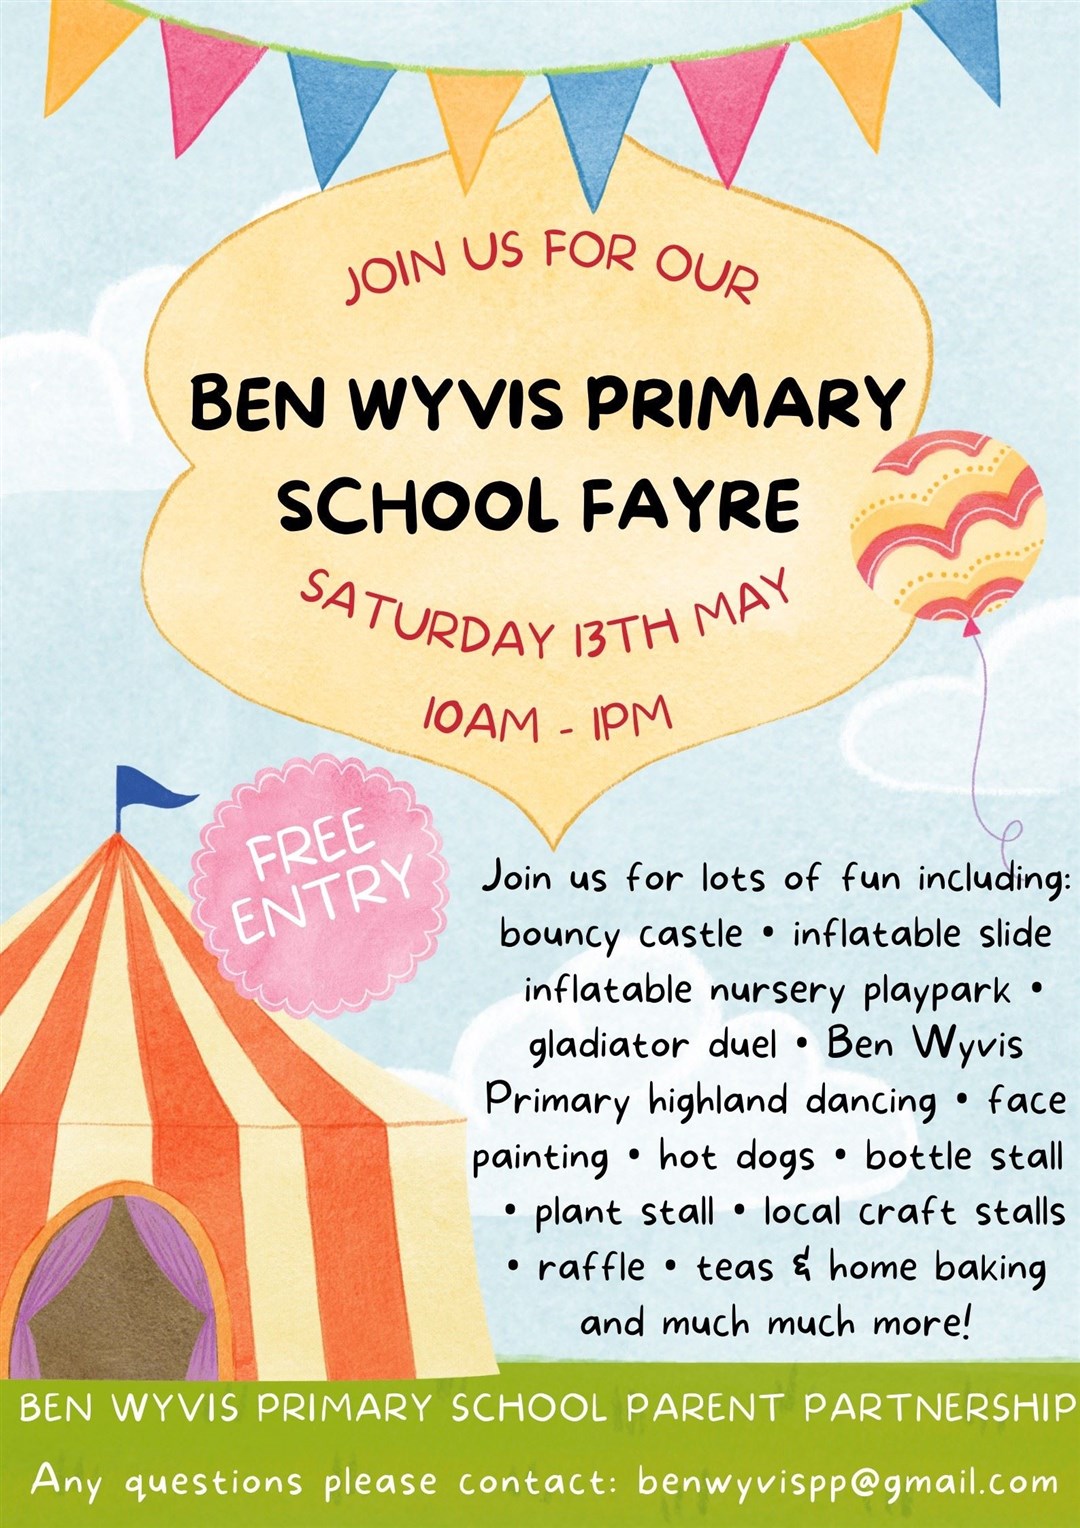 The Ben Wyvis Primary School Fayre is being staged on Saturday.